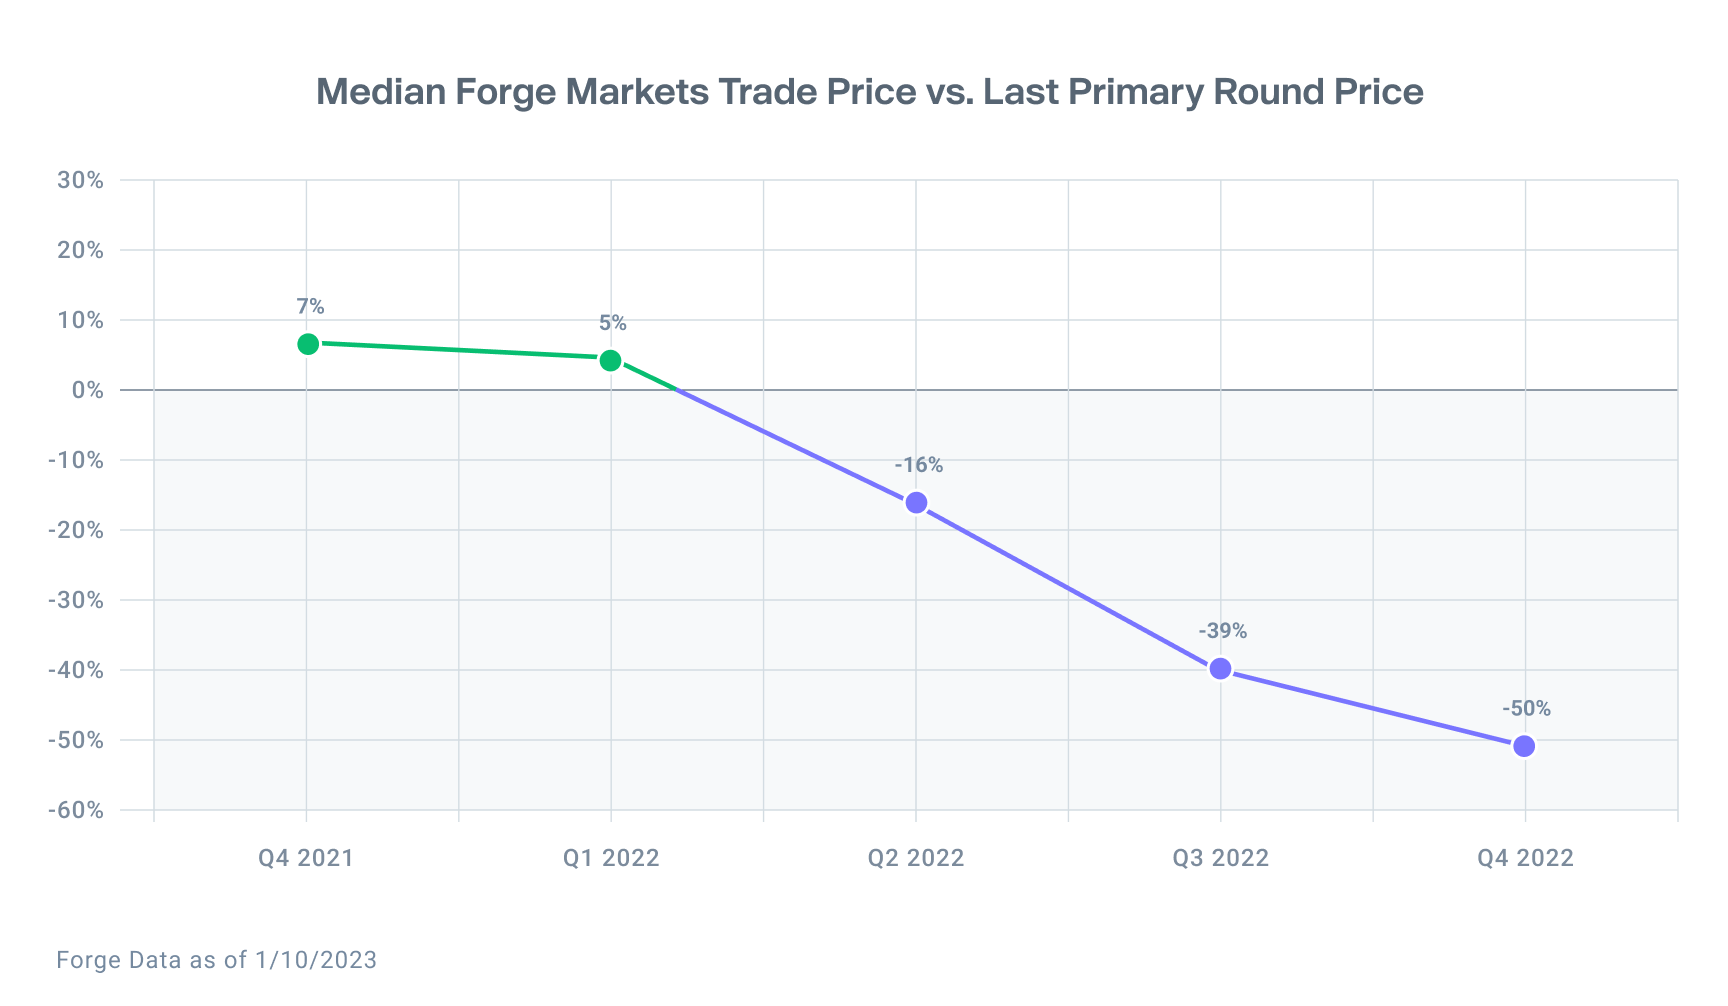 Line chart shows a drop in median Forge Markets trade price vs last primary round price